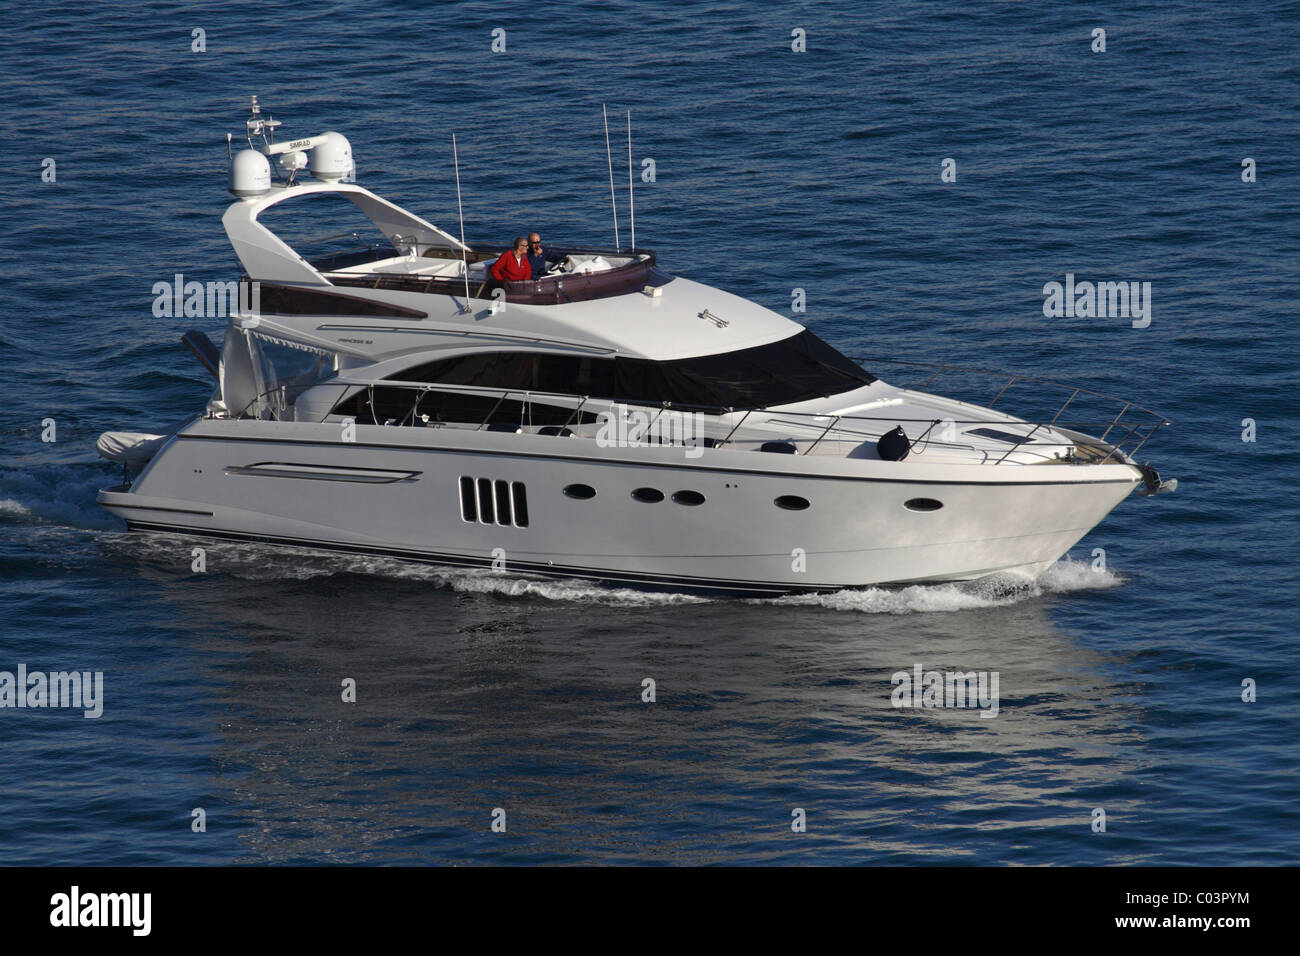 Princess 62 large motor yacht. Editorial use only. Stock Photo